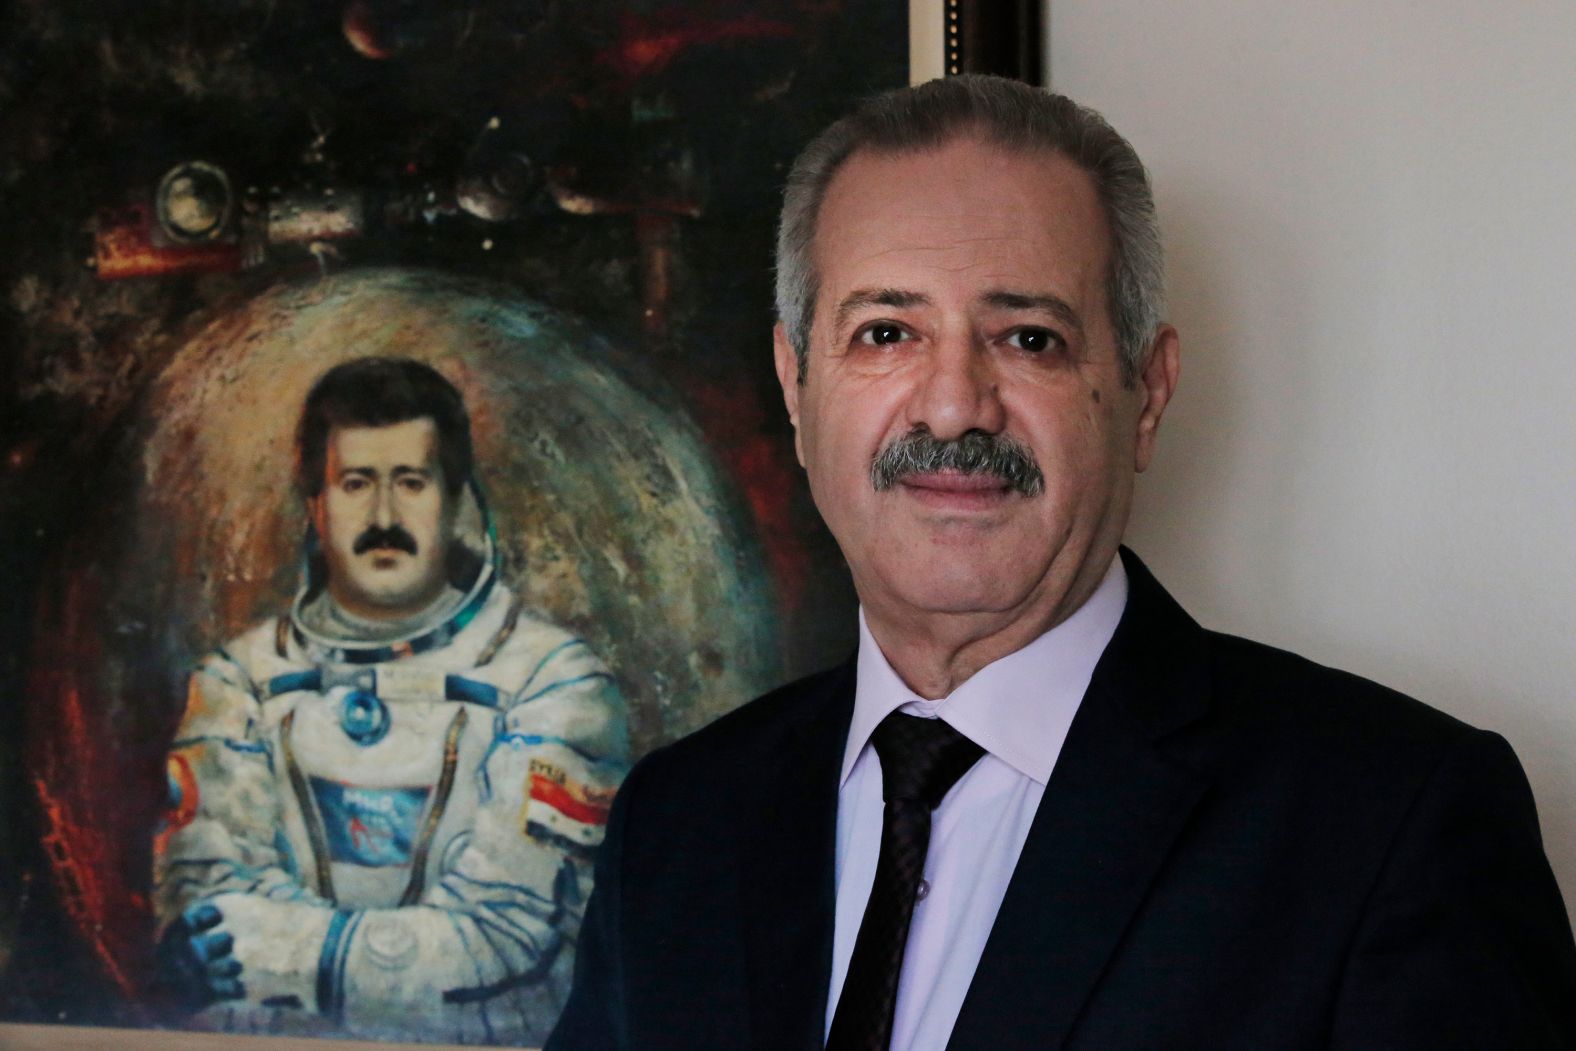 <a href="https://www.cnn.com/2024/04/21/middleeast/mohammad-faris-syria-astronaut-obit-intl-latam/index.html" target="_blank">Mohammad Faris</a>, Syria's only astronaut, died at age 72 on Friday, April 19, from complications of a heart attack he suffered a month ago, according to a close friend who spoke to CNN over the phone. Faris was known as the "Armstrong of the Arab World."